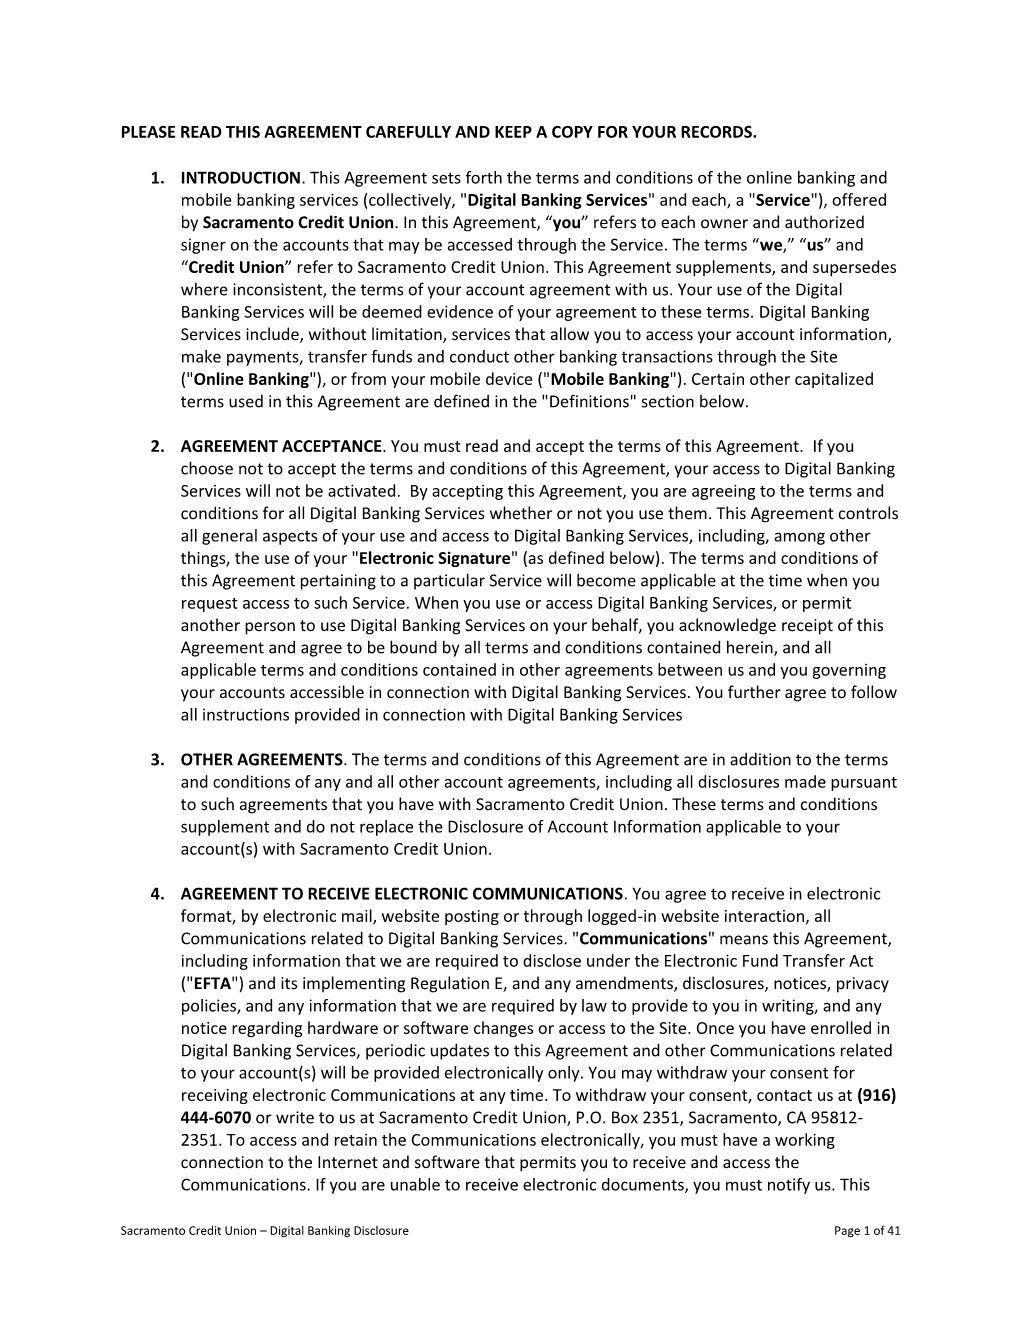 Digital Banking Disclosure Page 1 of 41